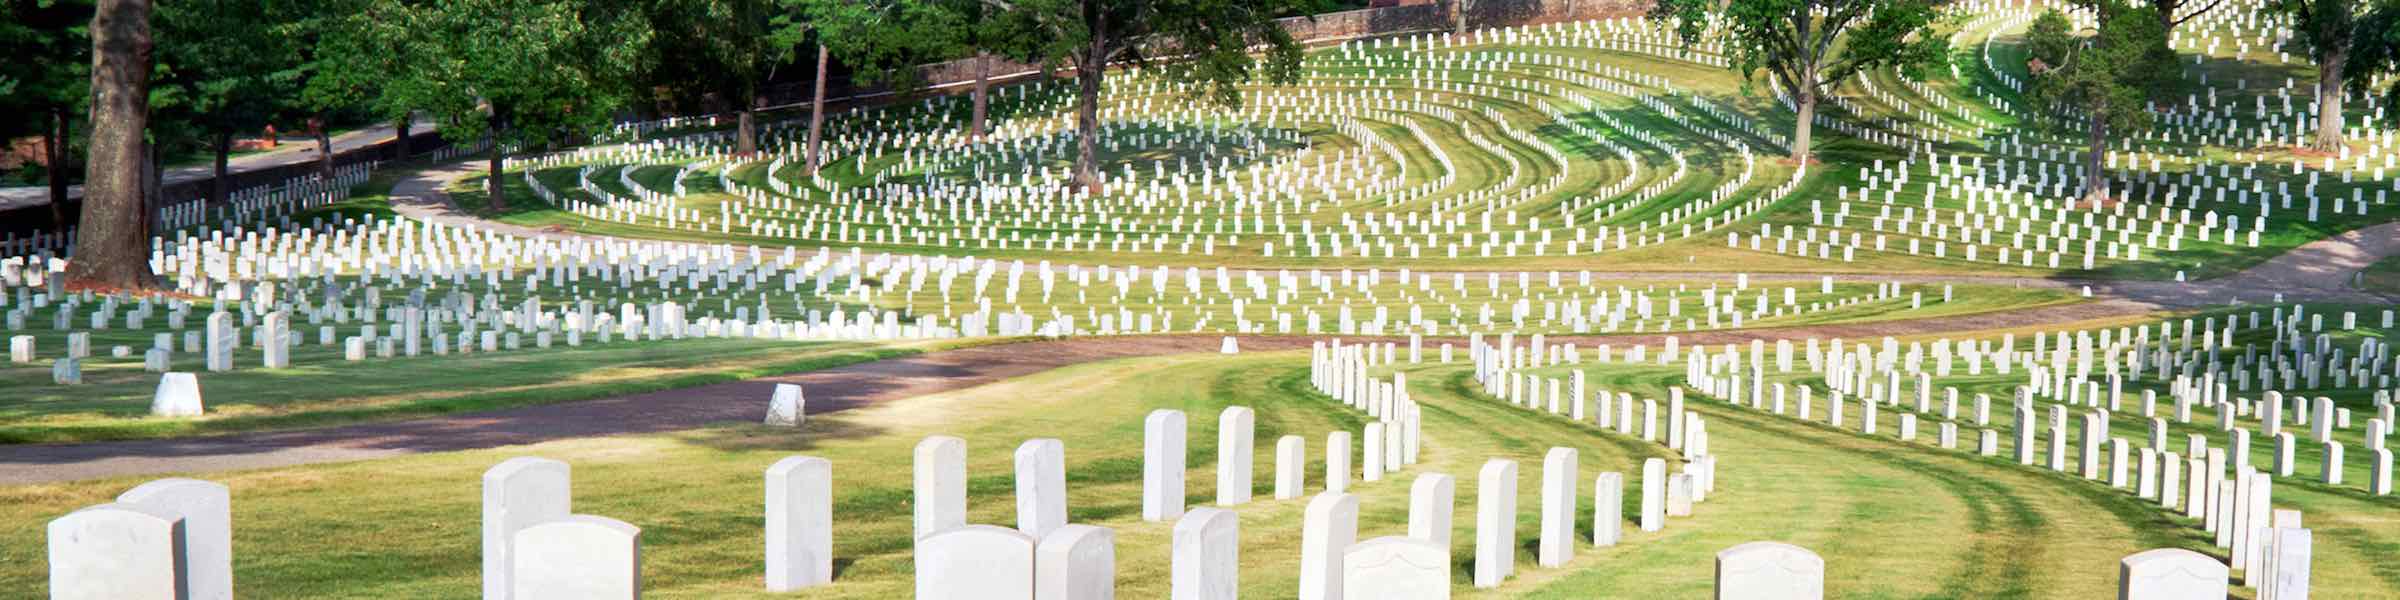 Rows of military graves in the National Cemetery at Marietta, Georgia.